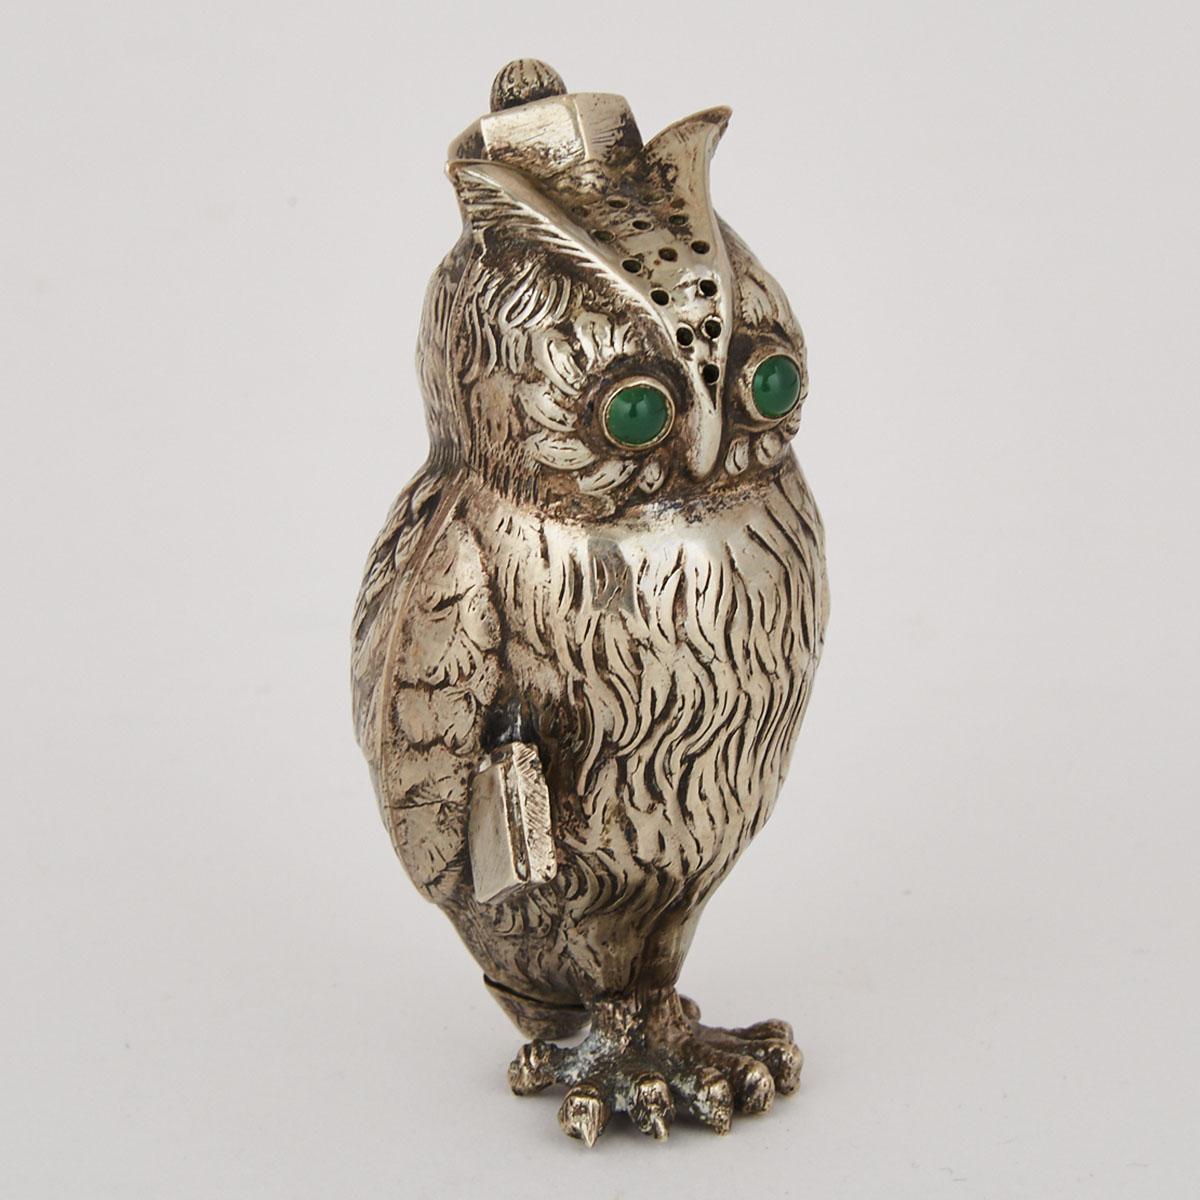 Nickel Silver Owl Form Pepperette, 20th century